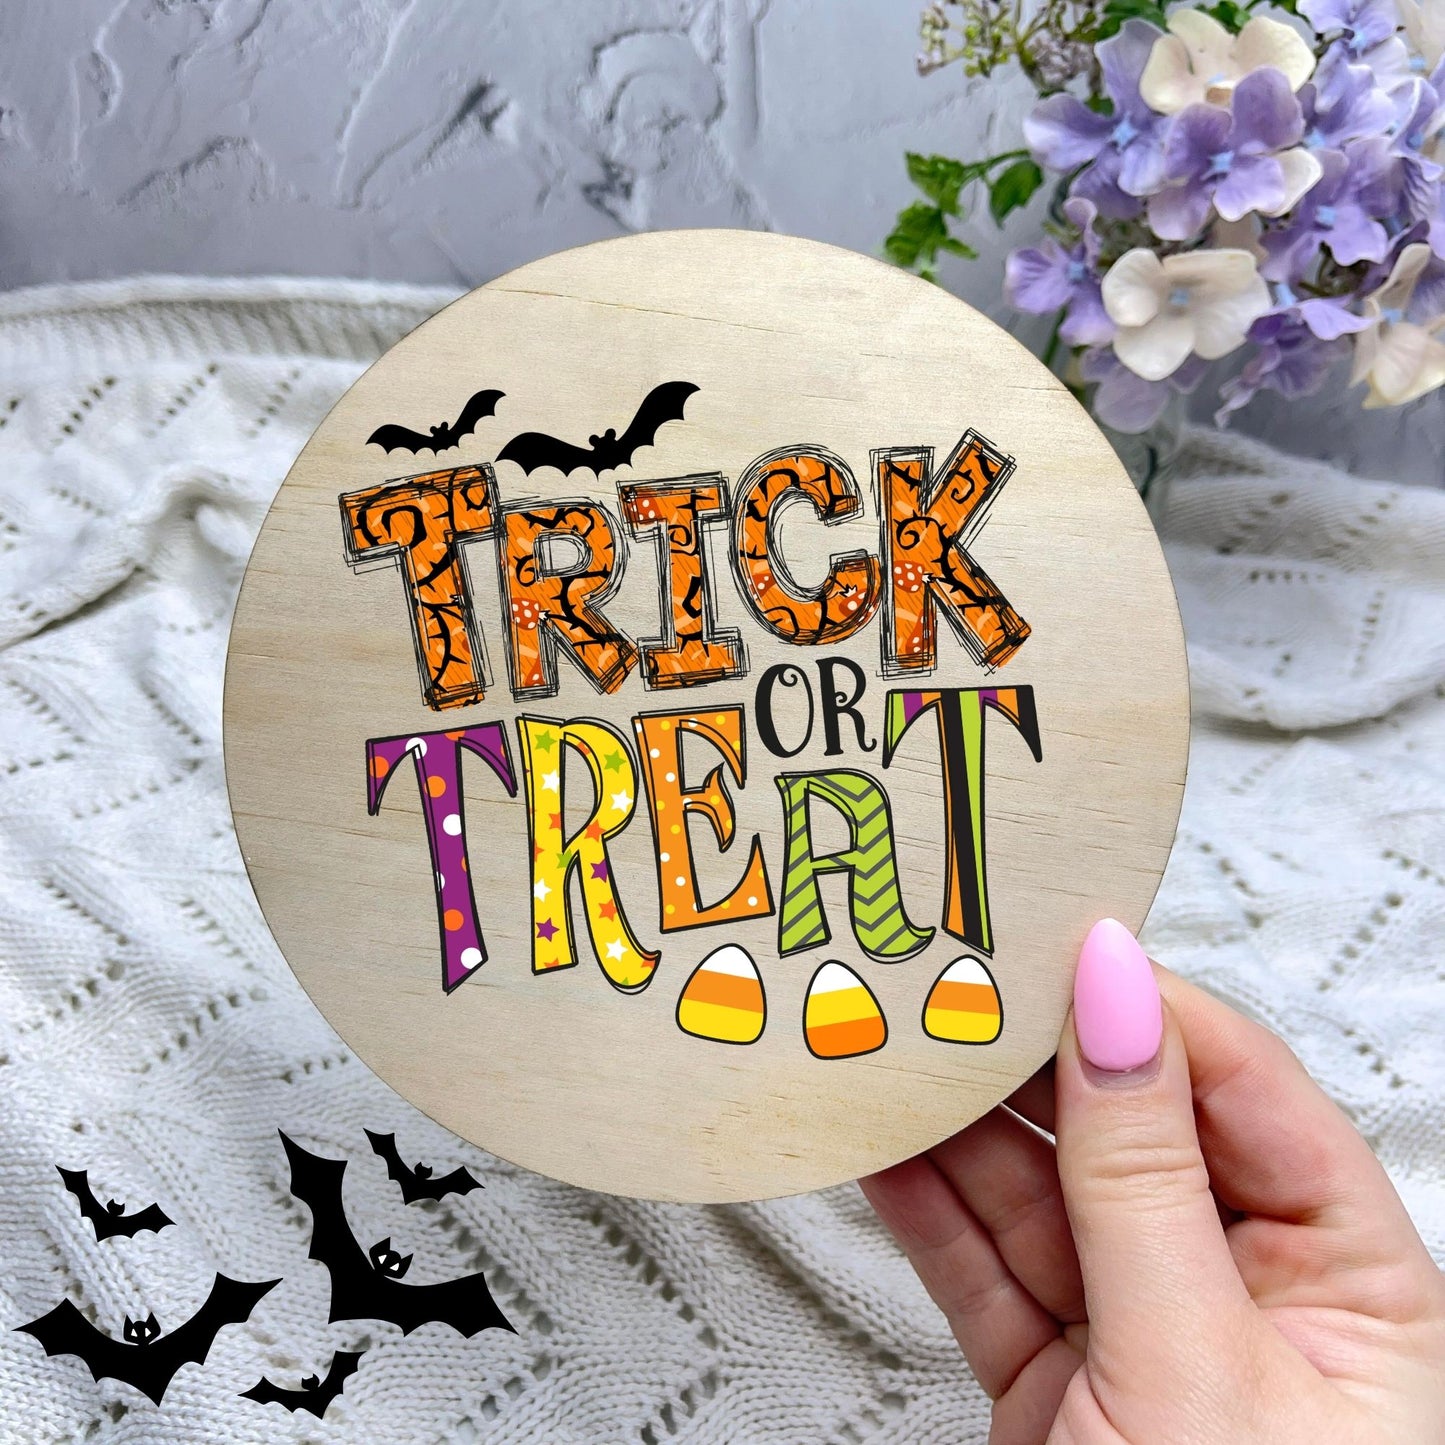 Trick or Treat sign, Halloween Decor, Spooky Vibes, hocus pocus sign, trick or treat decor, haunted house h6